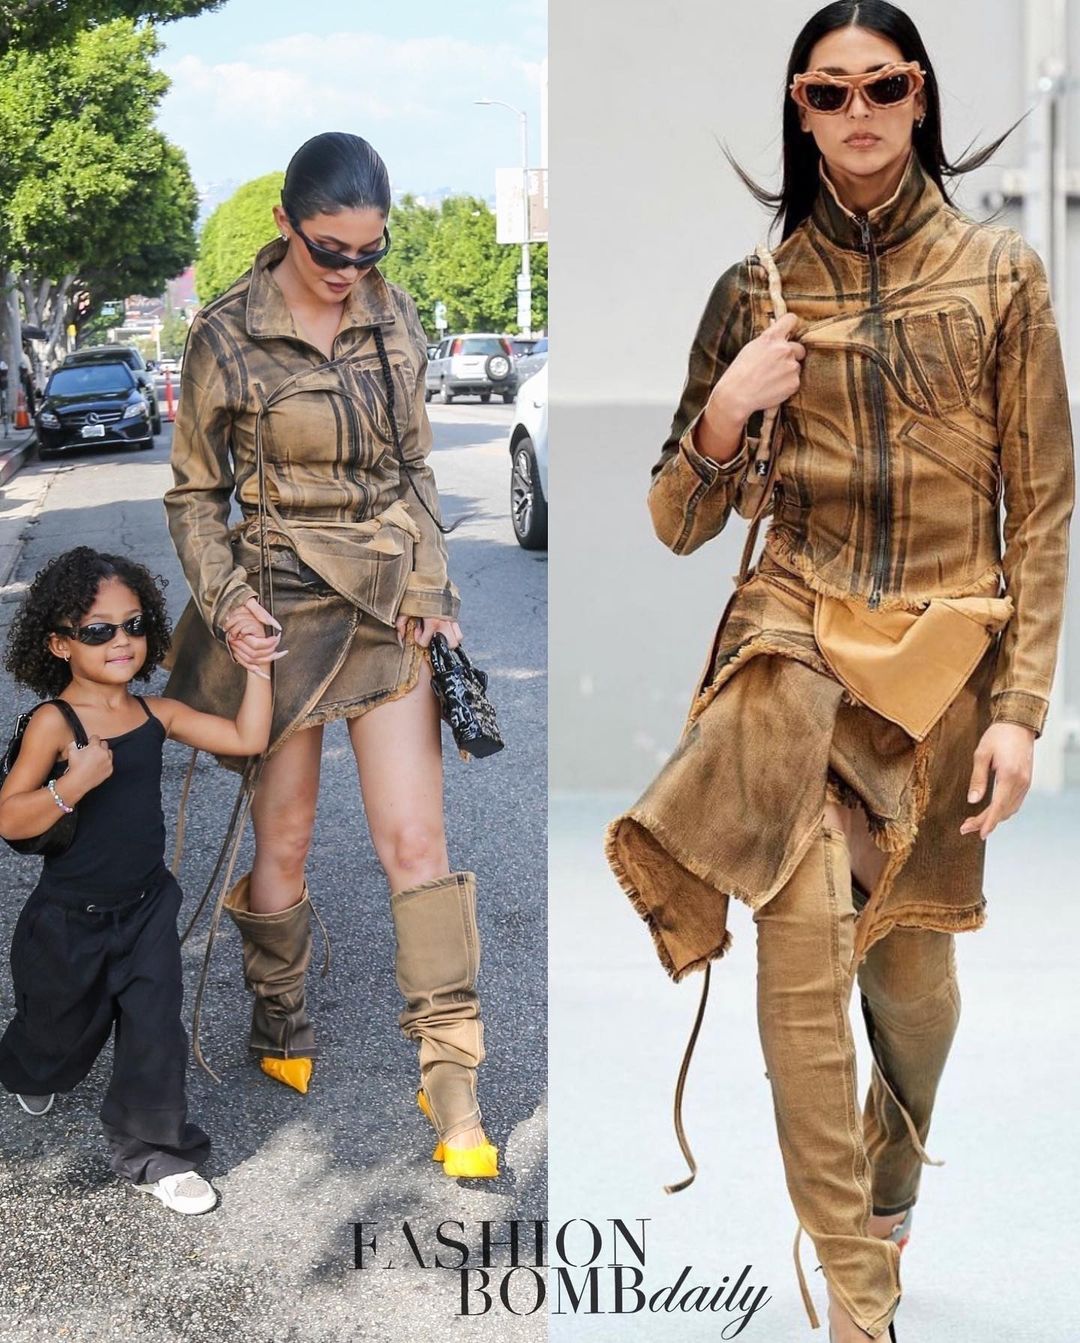 Kylie Jenner Goes Grunge with Stormi Webster in Torn Leather Pants